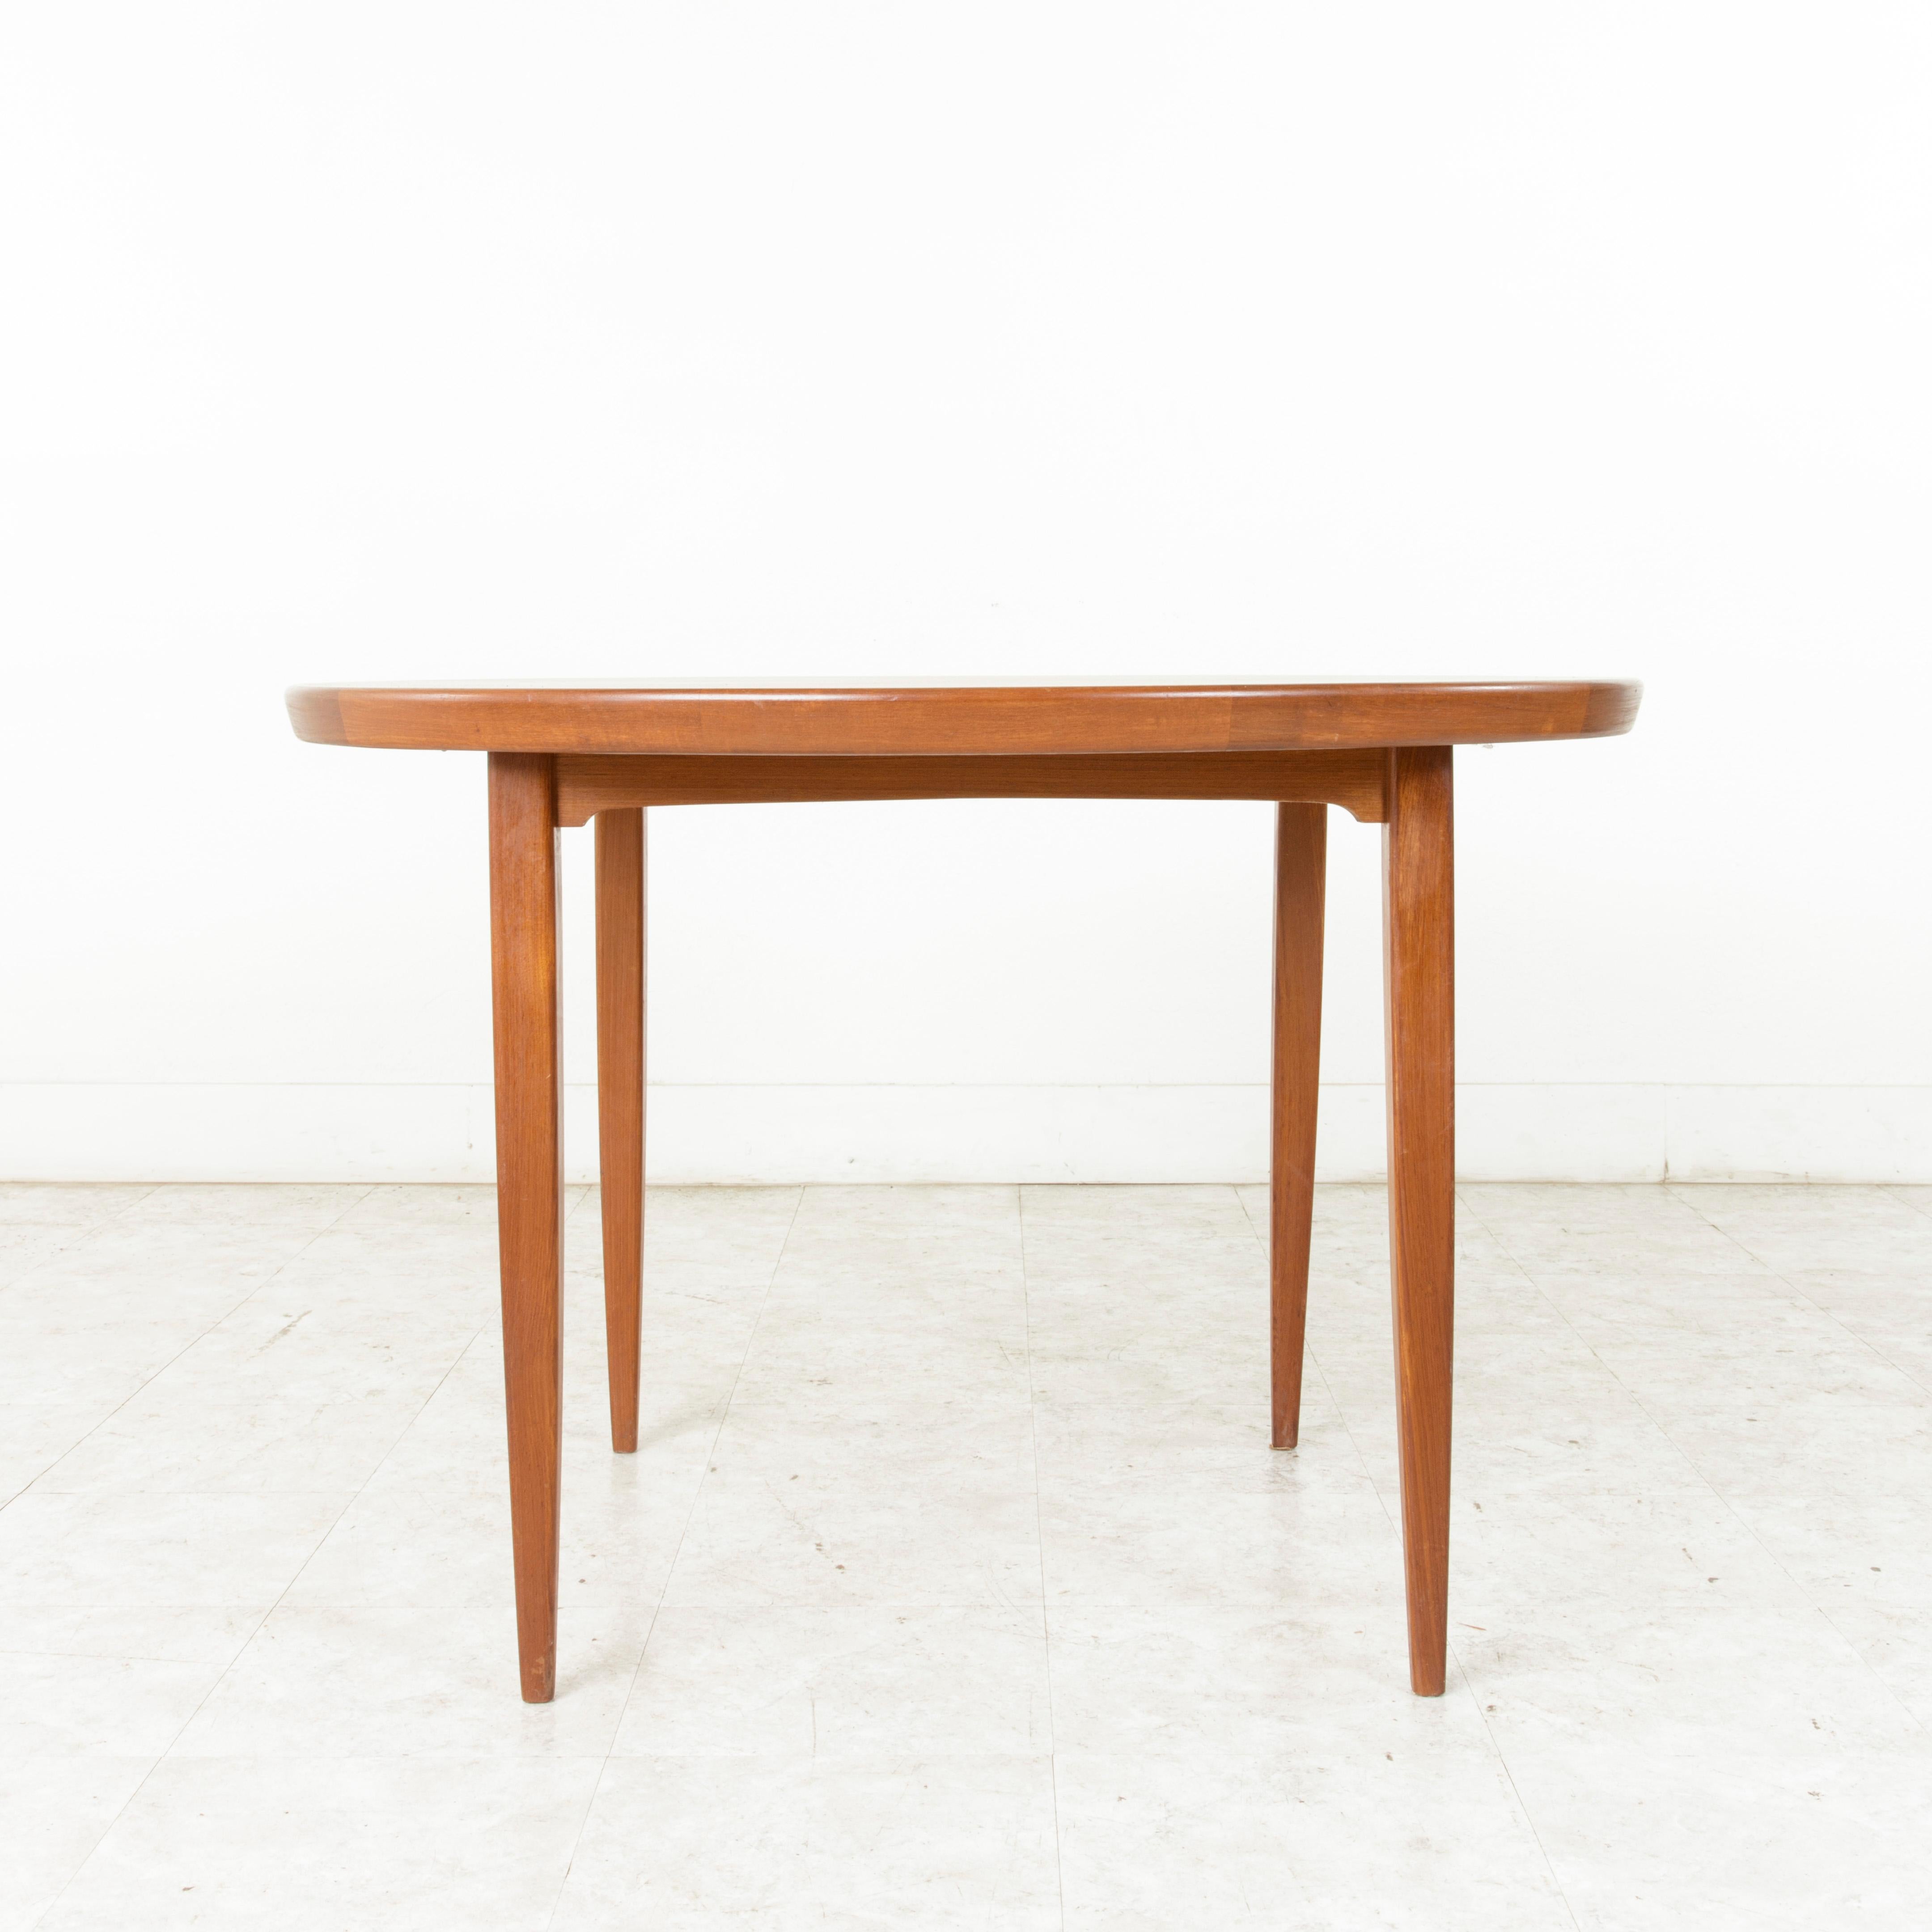 Upholstery Midcentury Danish Round Teak Table and Four Chairs by Niels Koefoed, Hornslet